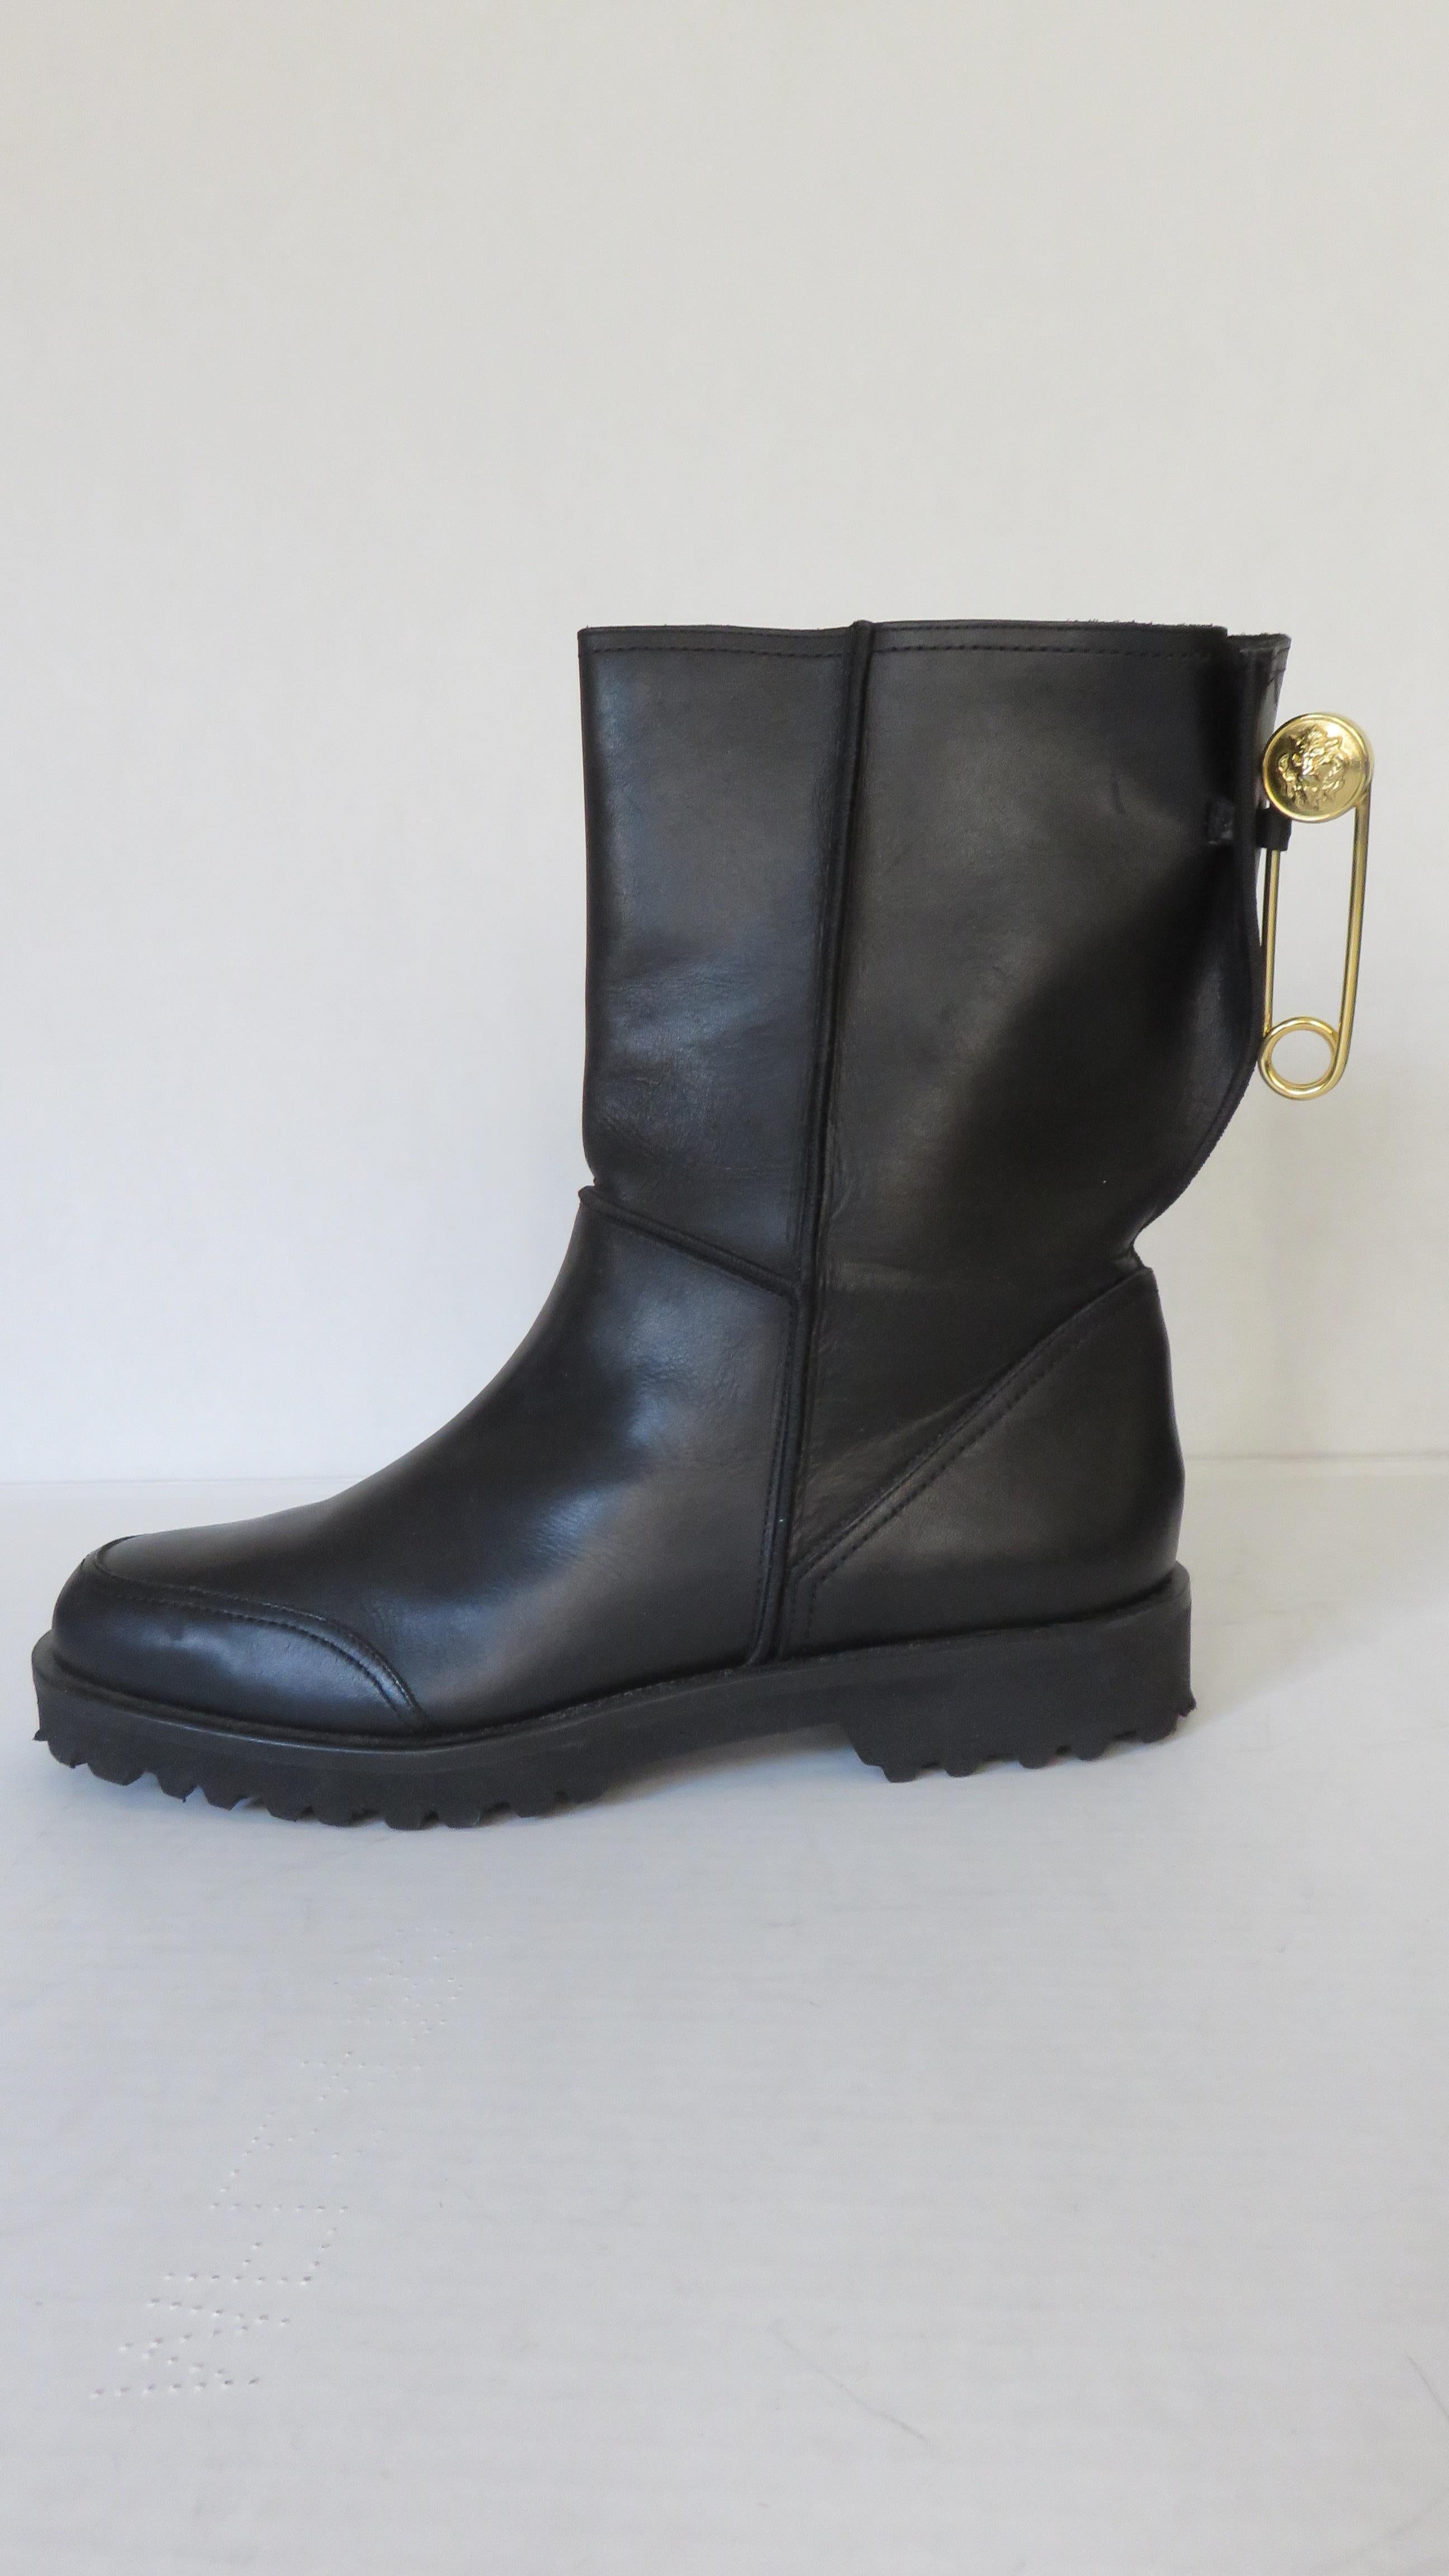 Gianni Versace New Size 37.5 Safety Pin Boots 1990s 10